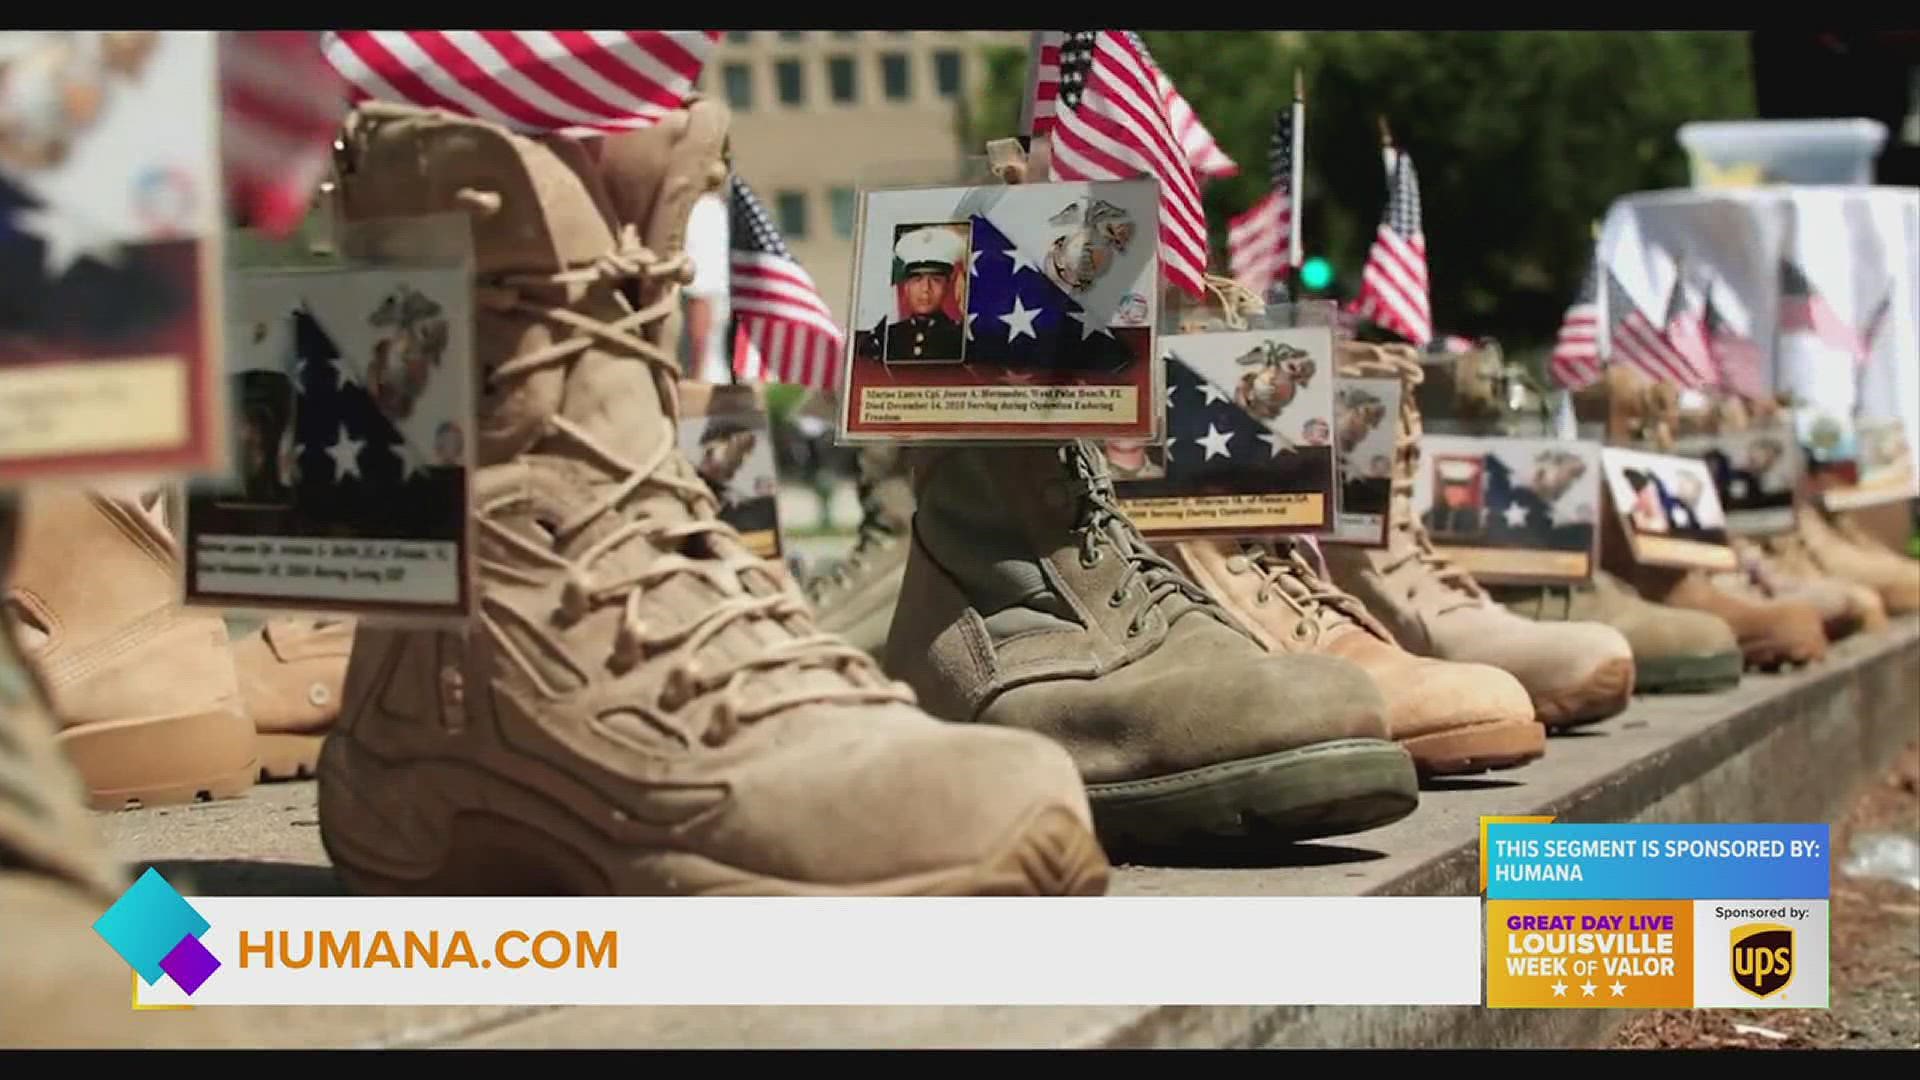 To learn more about Veteran Medicare plans through Humana, visit Humana.com.